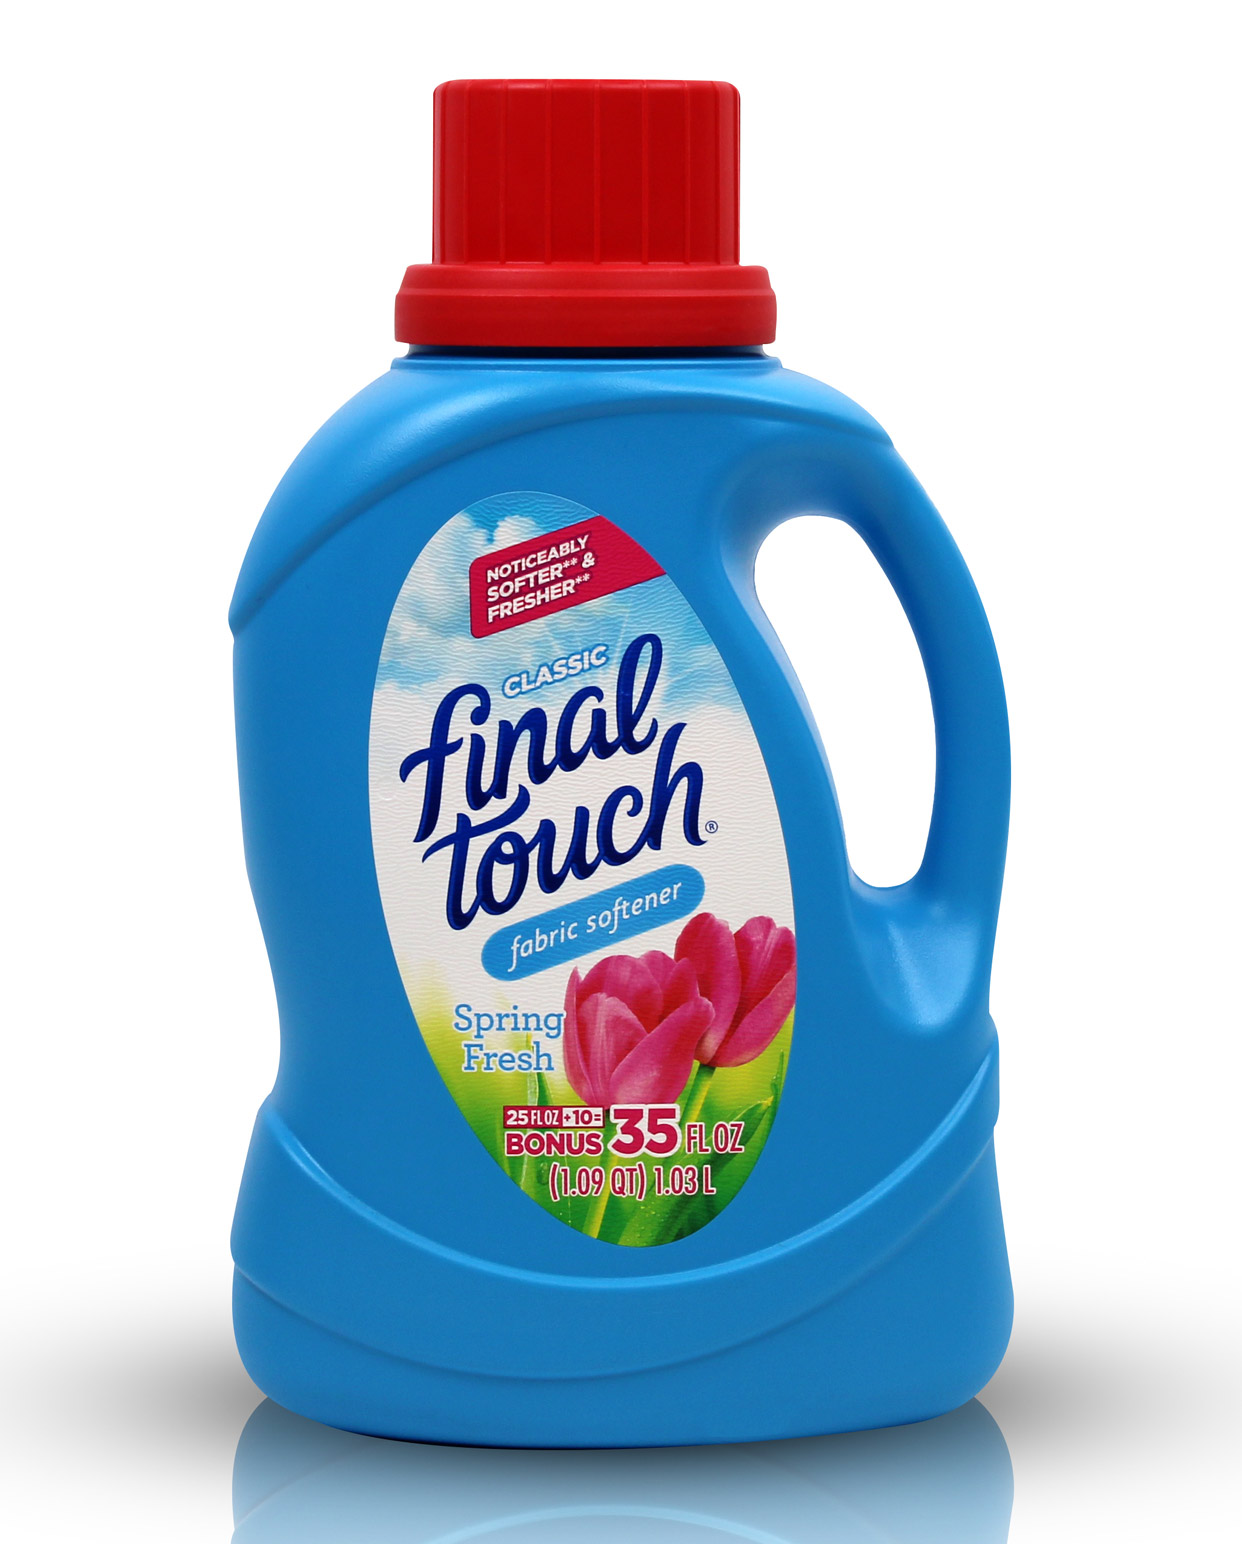 35oz bottle of Fabric Softener Liquid with Spring Fresh Scent.